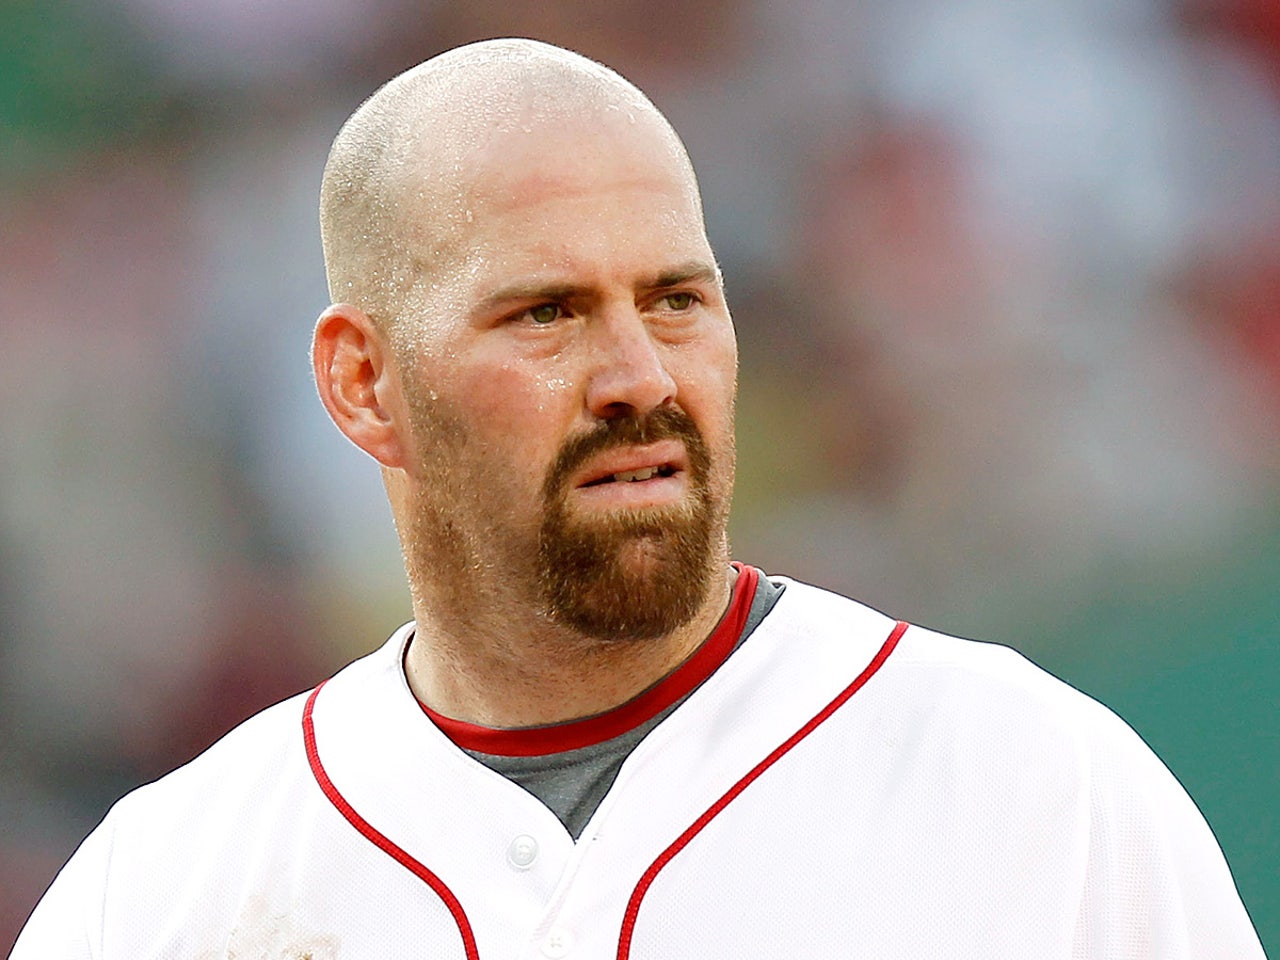 Boston Red Sox: Was Kevin Youkilis really the Greek God of Walks?